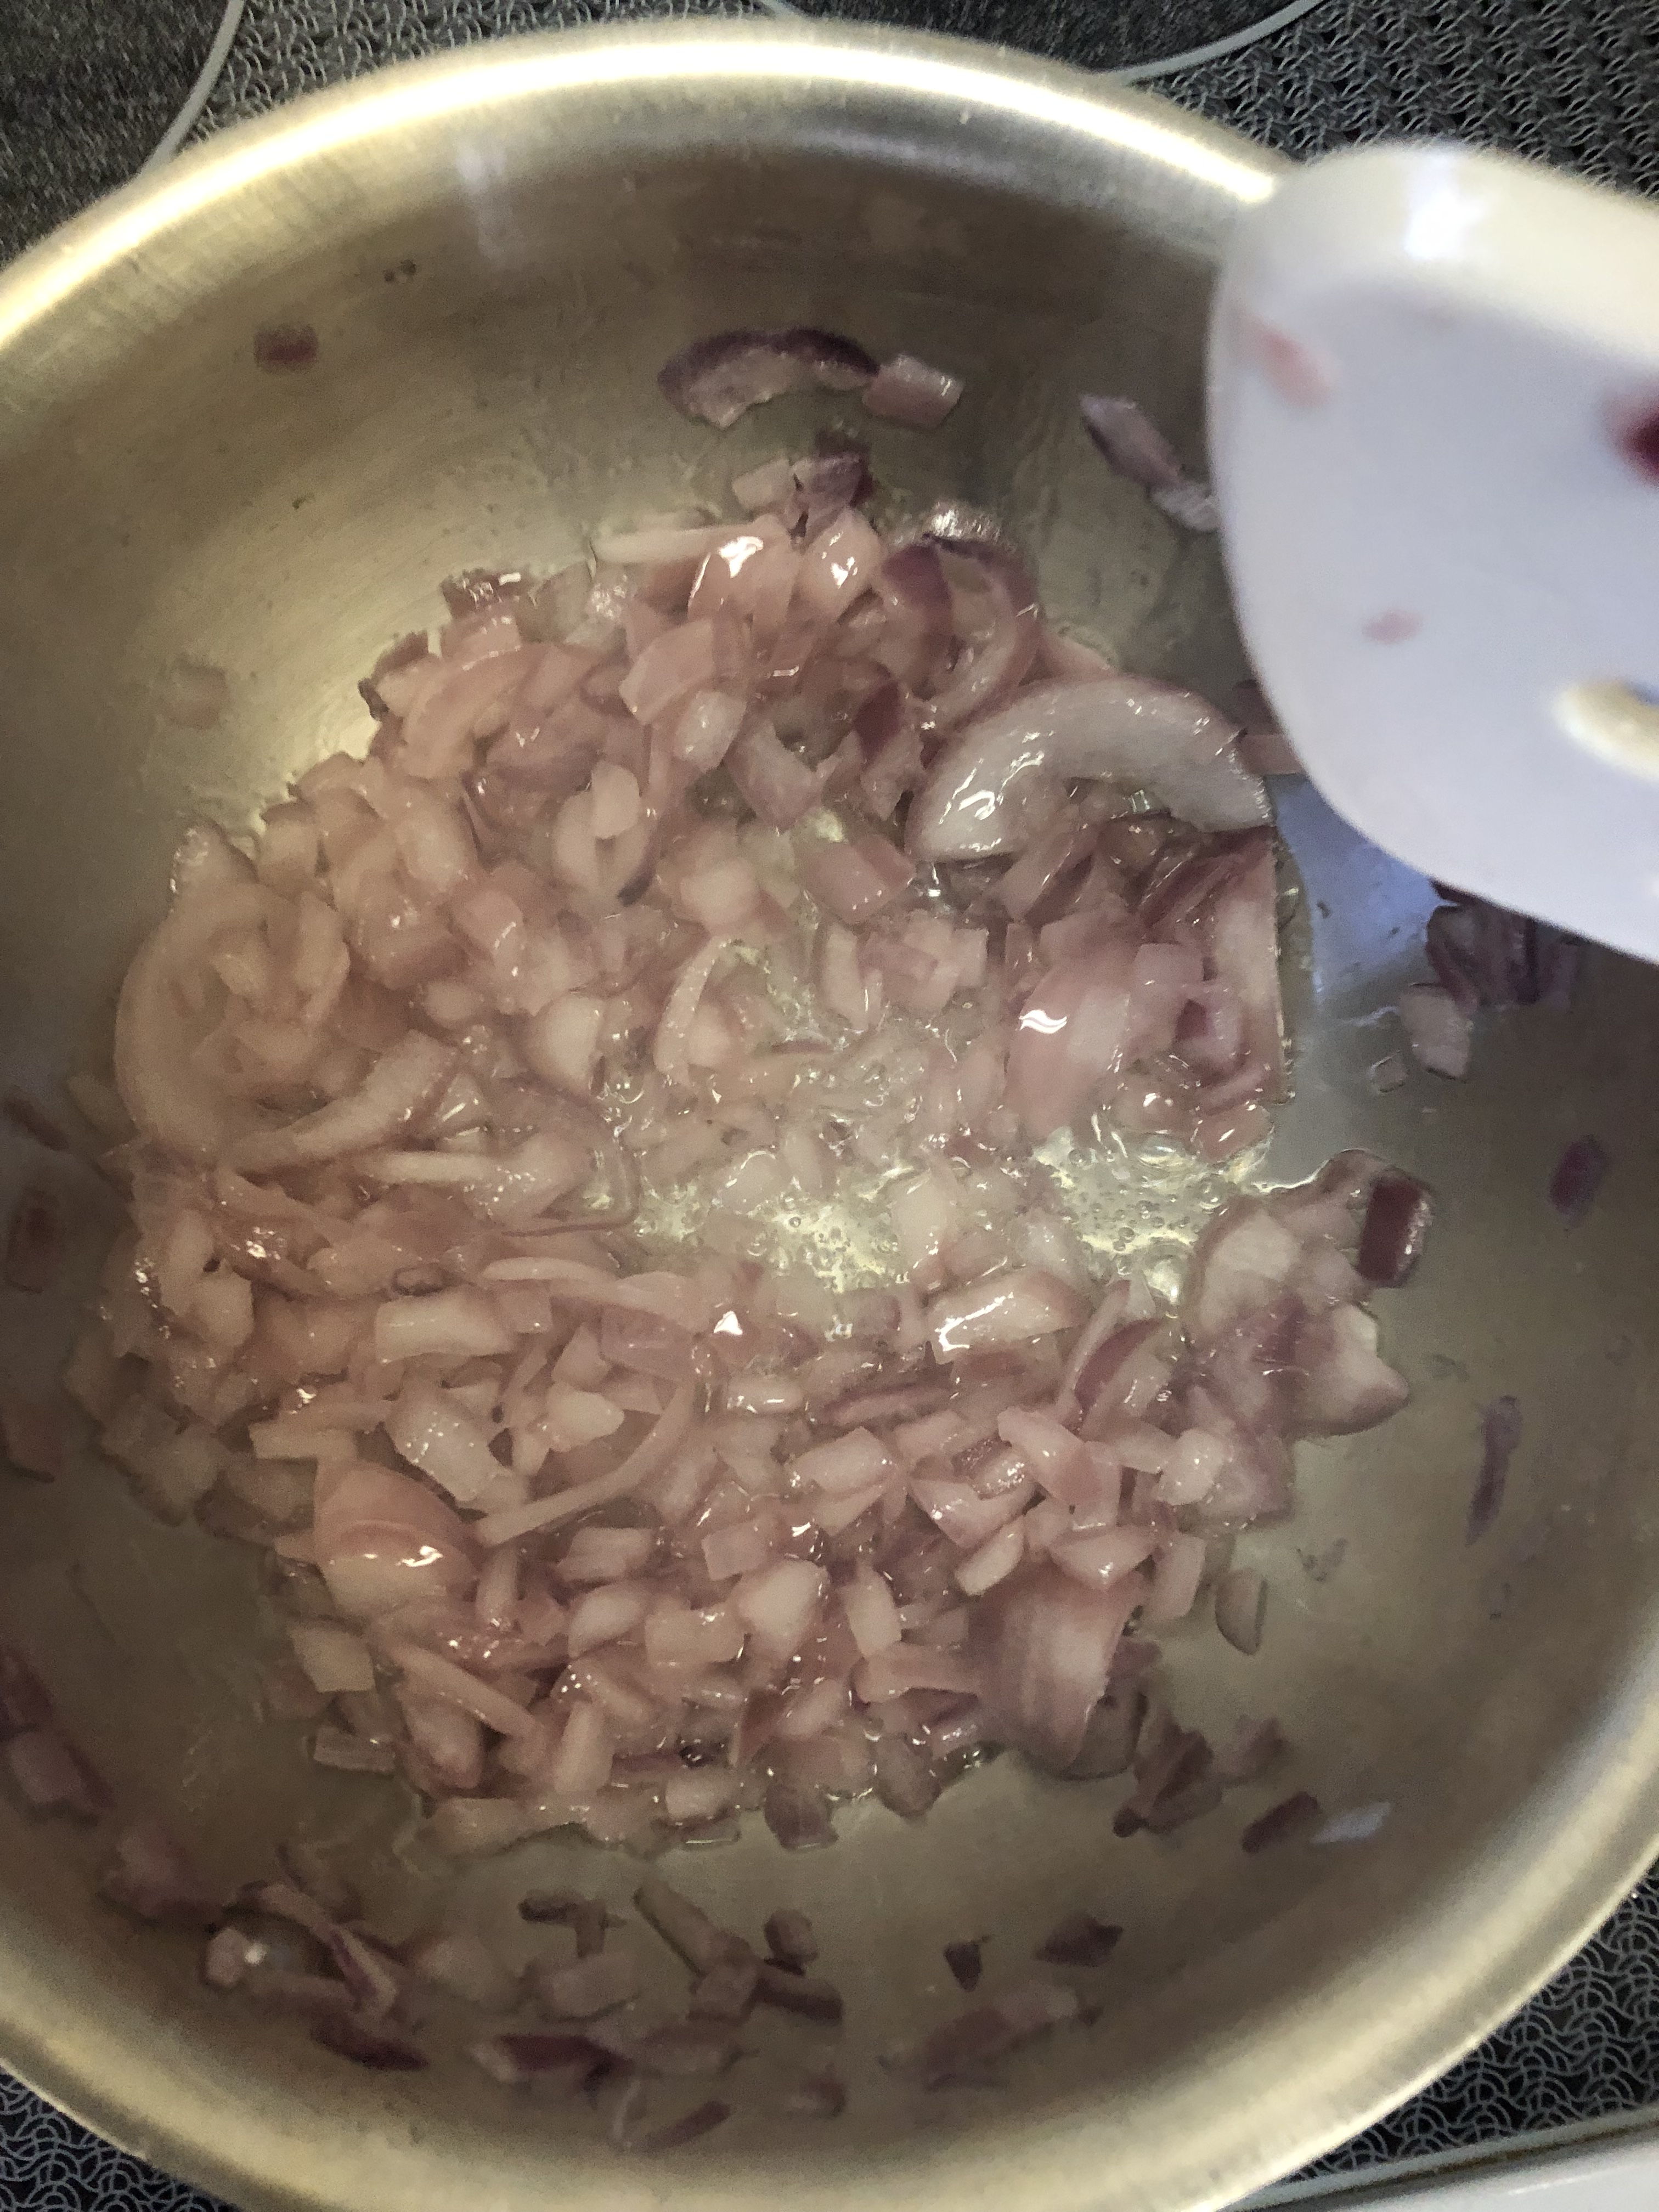 Cooking onions for Indian food